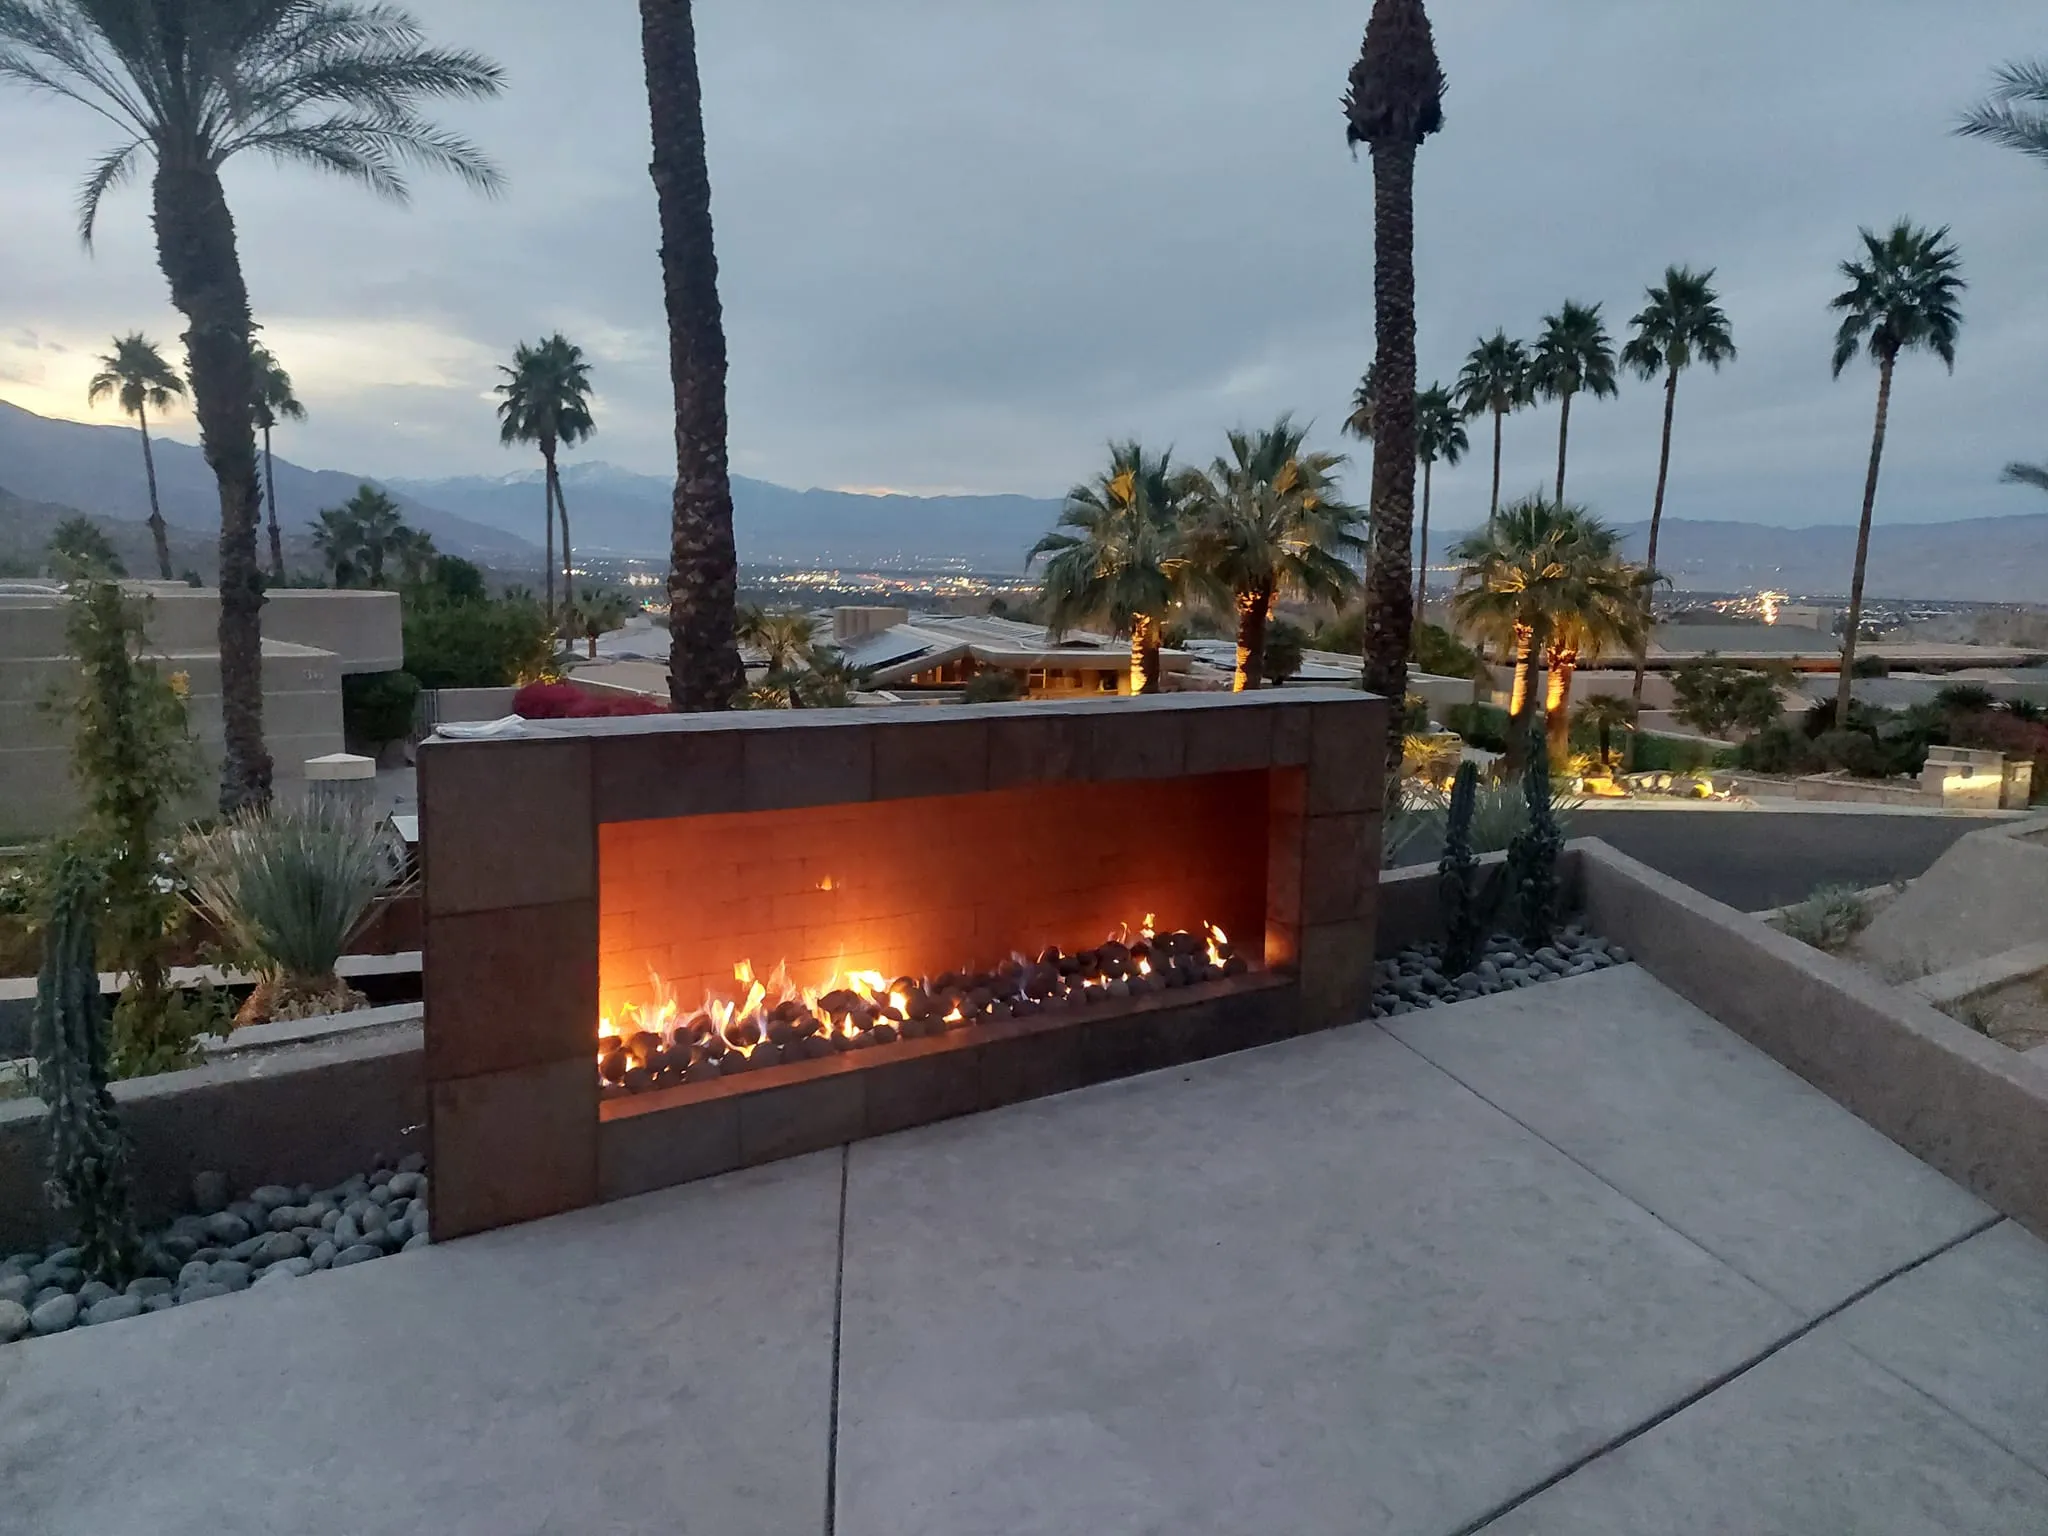 All Photos for EG Landscape in Coachella Valley, CA